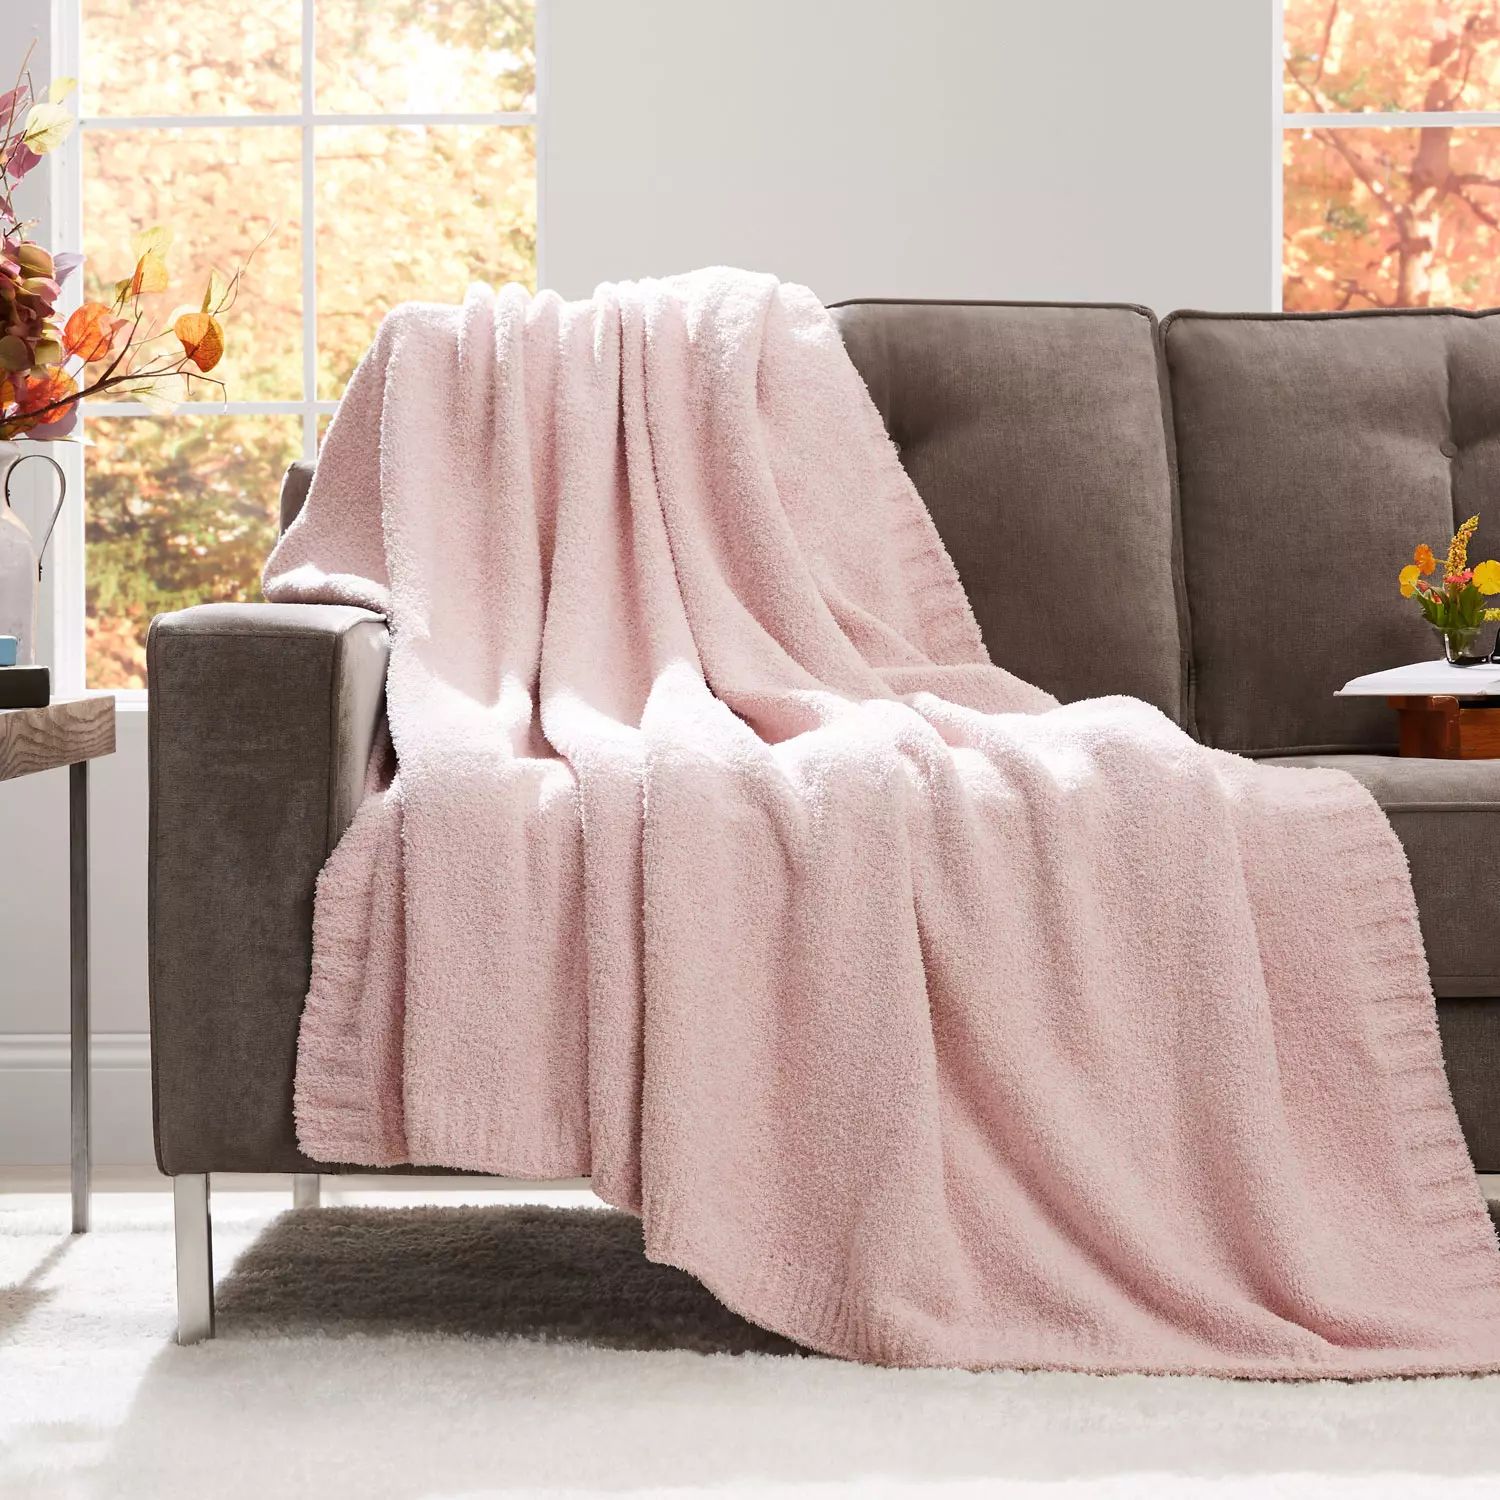 Member's Mark Heathered Cozy Knit Throw 60"x70" (Assorted Colors) | Sam's Club